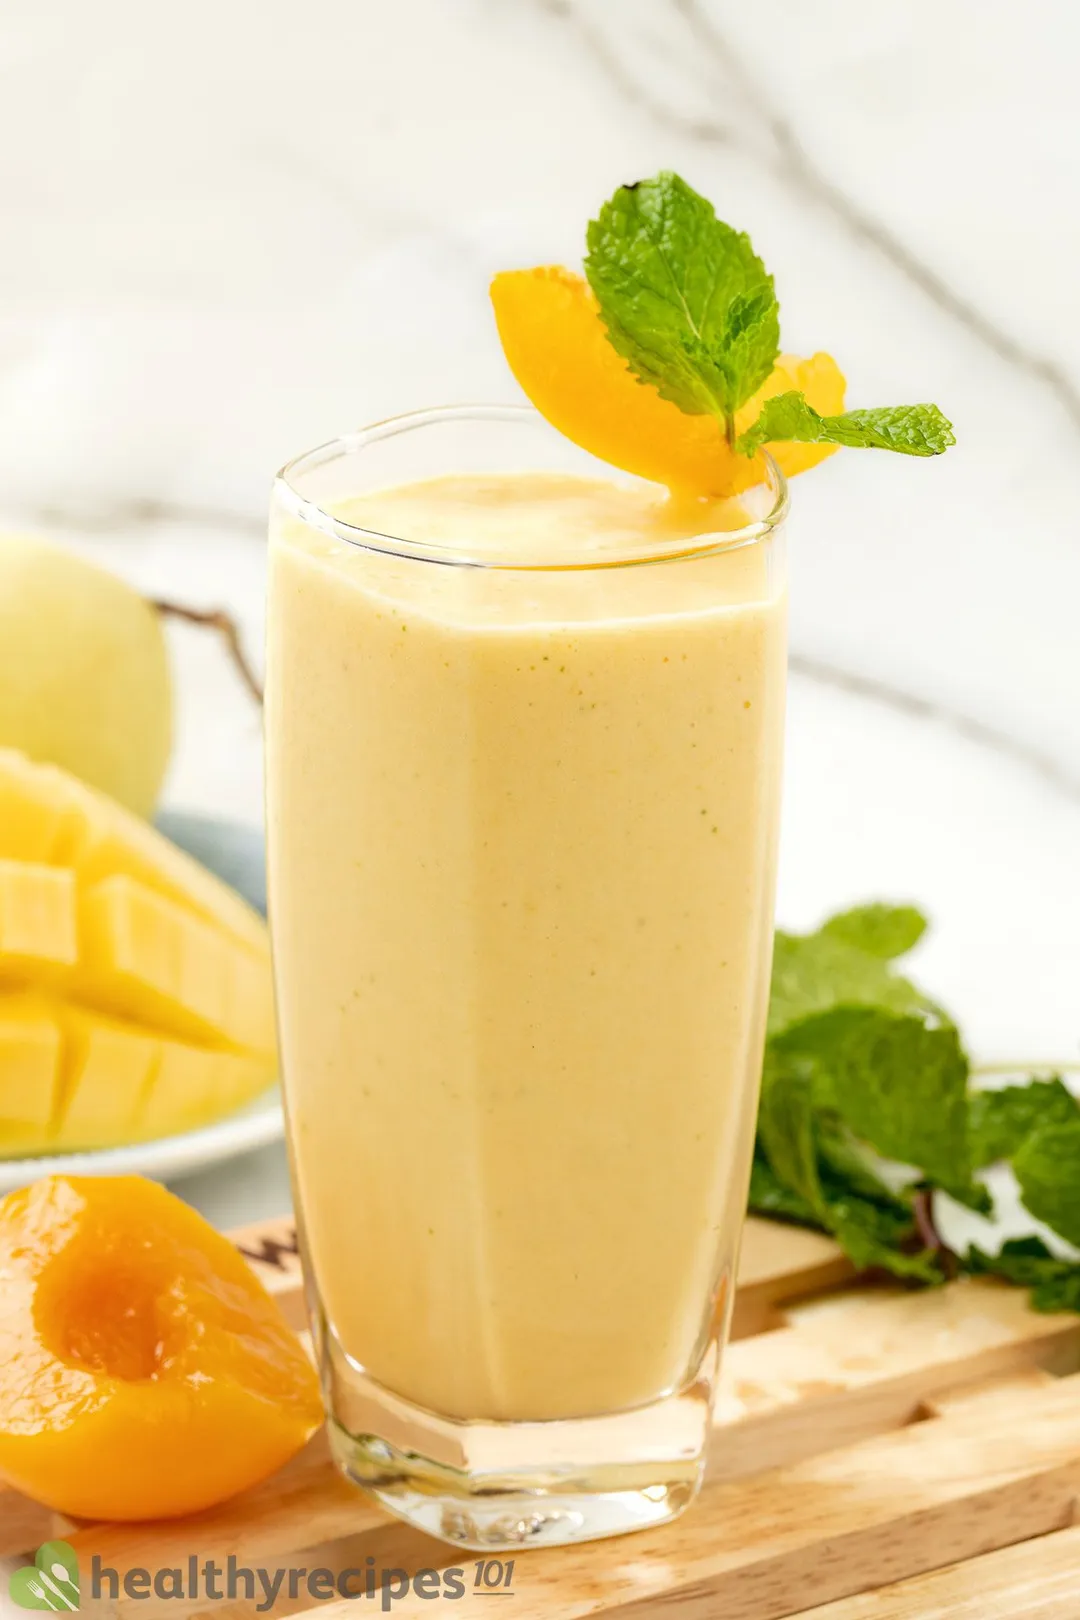 A glass of peach smoothie placed on a wooden board with a peach, sliced mango, and mint leaves nearby.